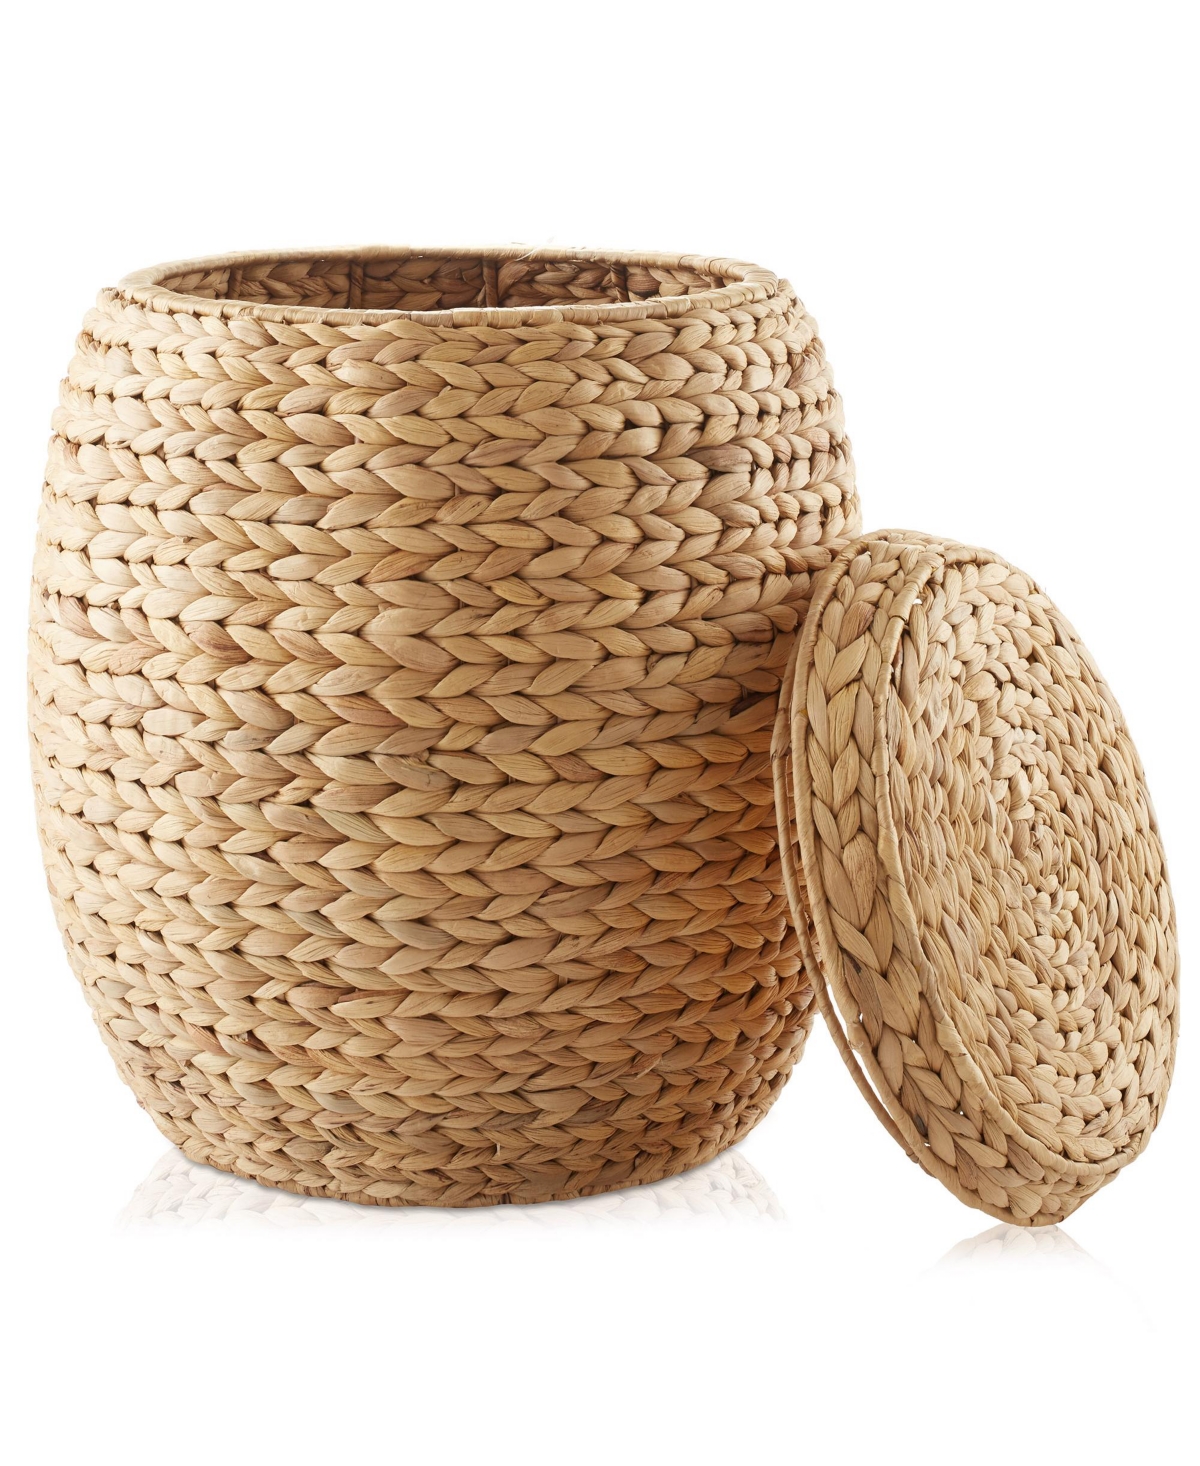 Round Storage Basket with Lid, Natural - Handwoven Water Hyacinth Hamper Organizer for Laundry, Blankets, Plants - Espresso